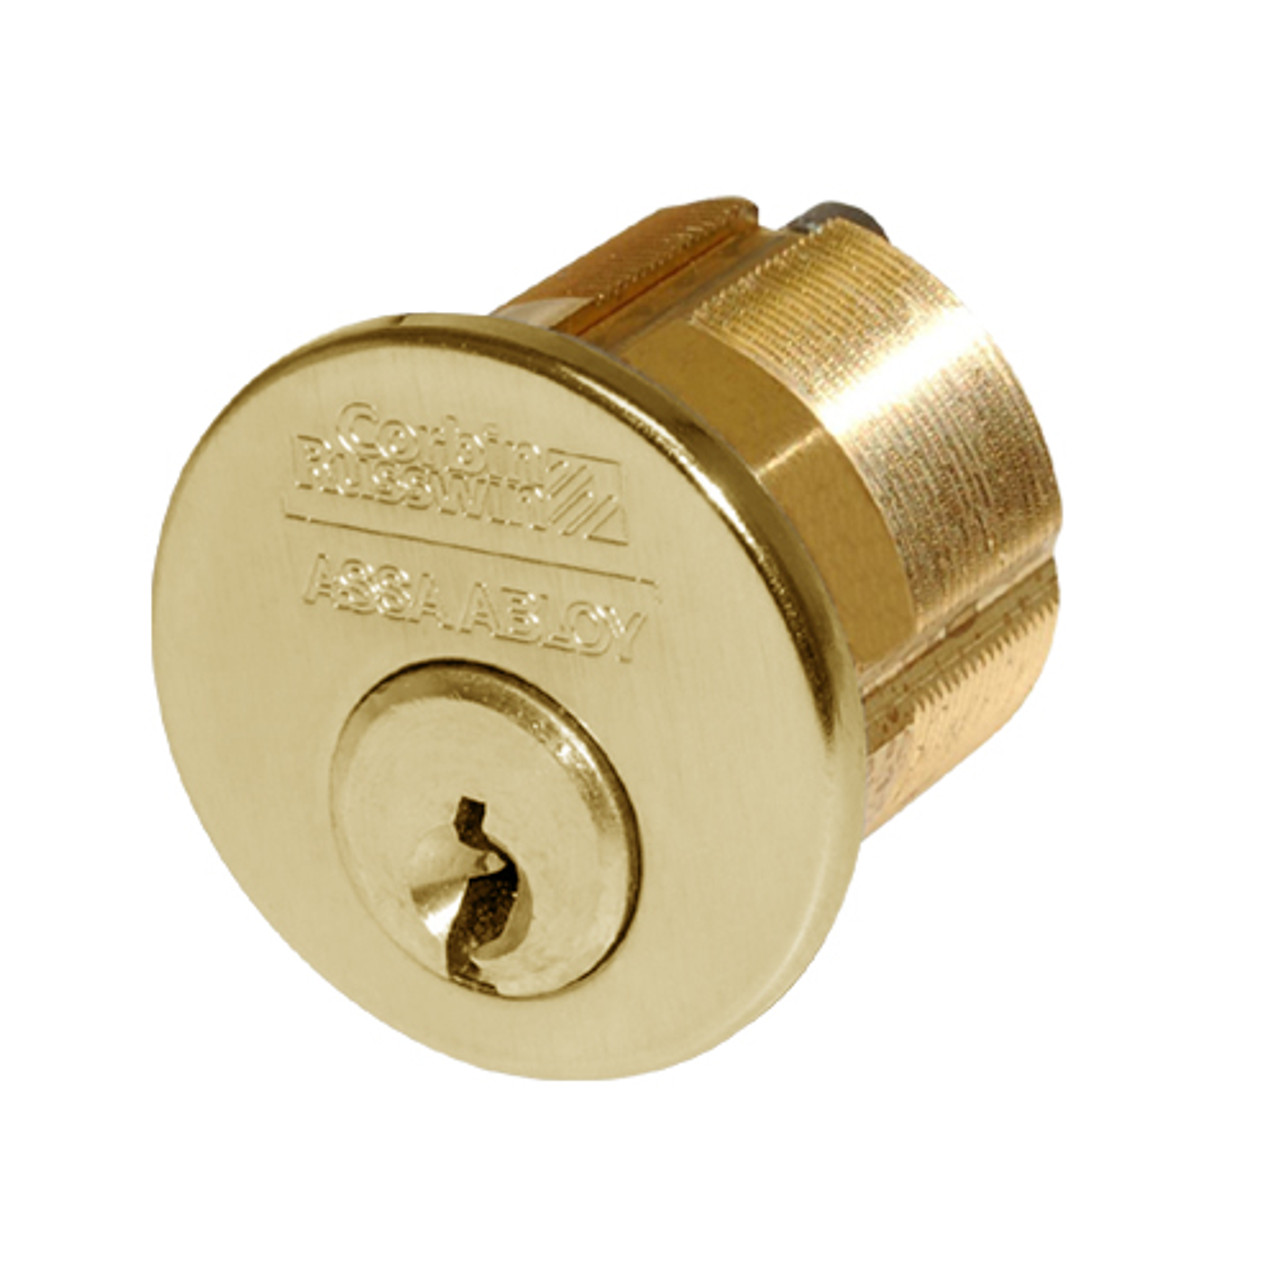 CR1000-114-A01-6-59A1-605 Corbin Conventional Mortise Cylinder for Mortise Lock and DL3000 Deadlocks with Cloverleaf Cam in Bright Brass Finish